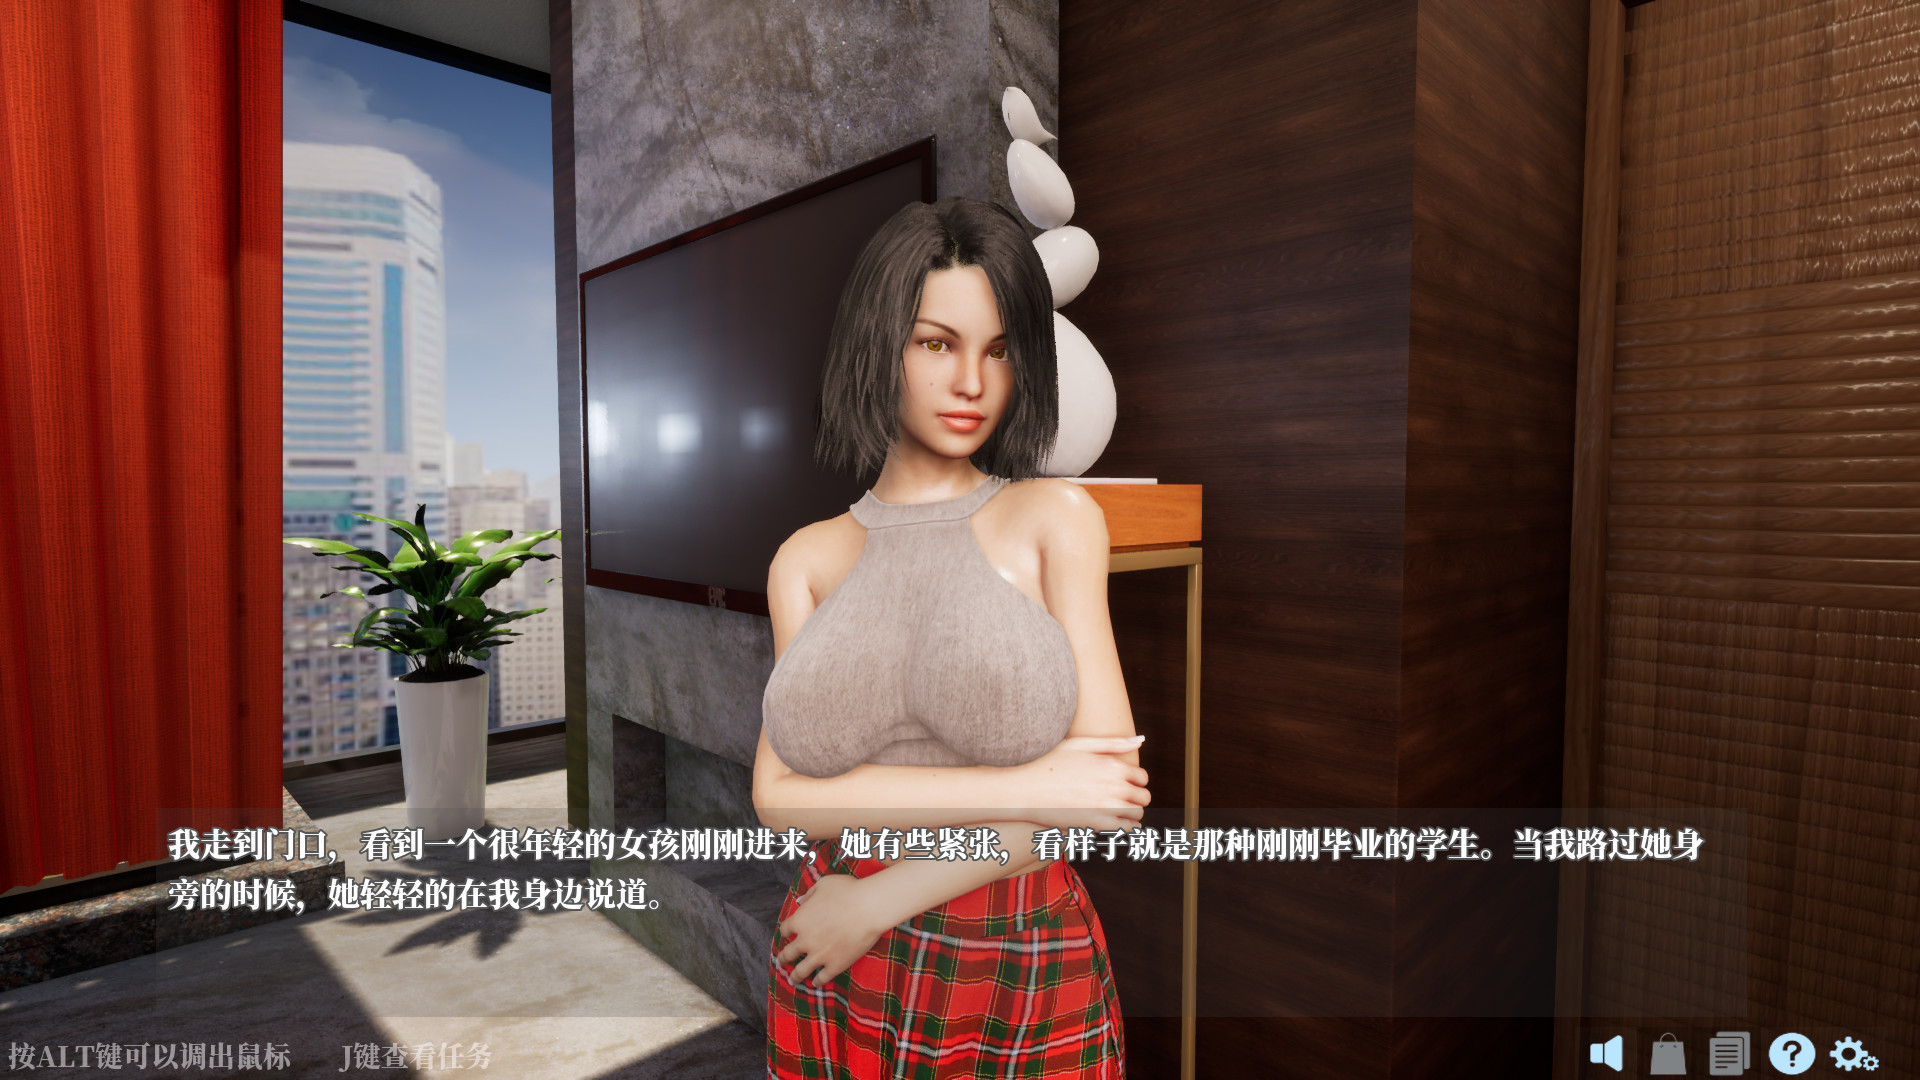 DreamEater 噬梦者 Free Download